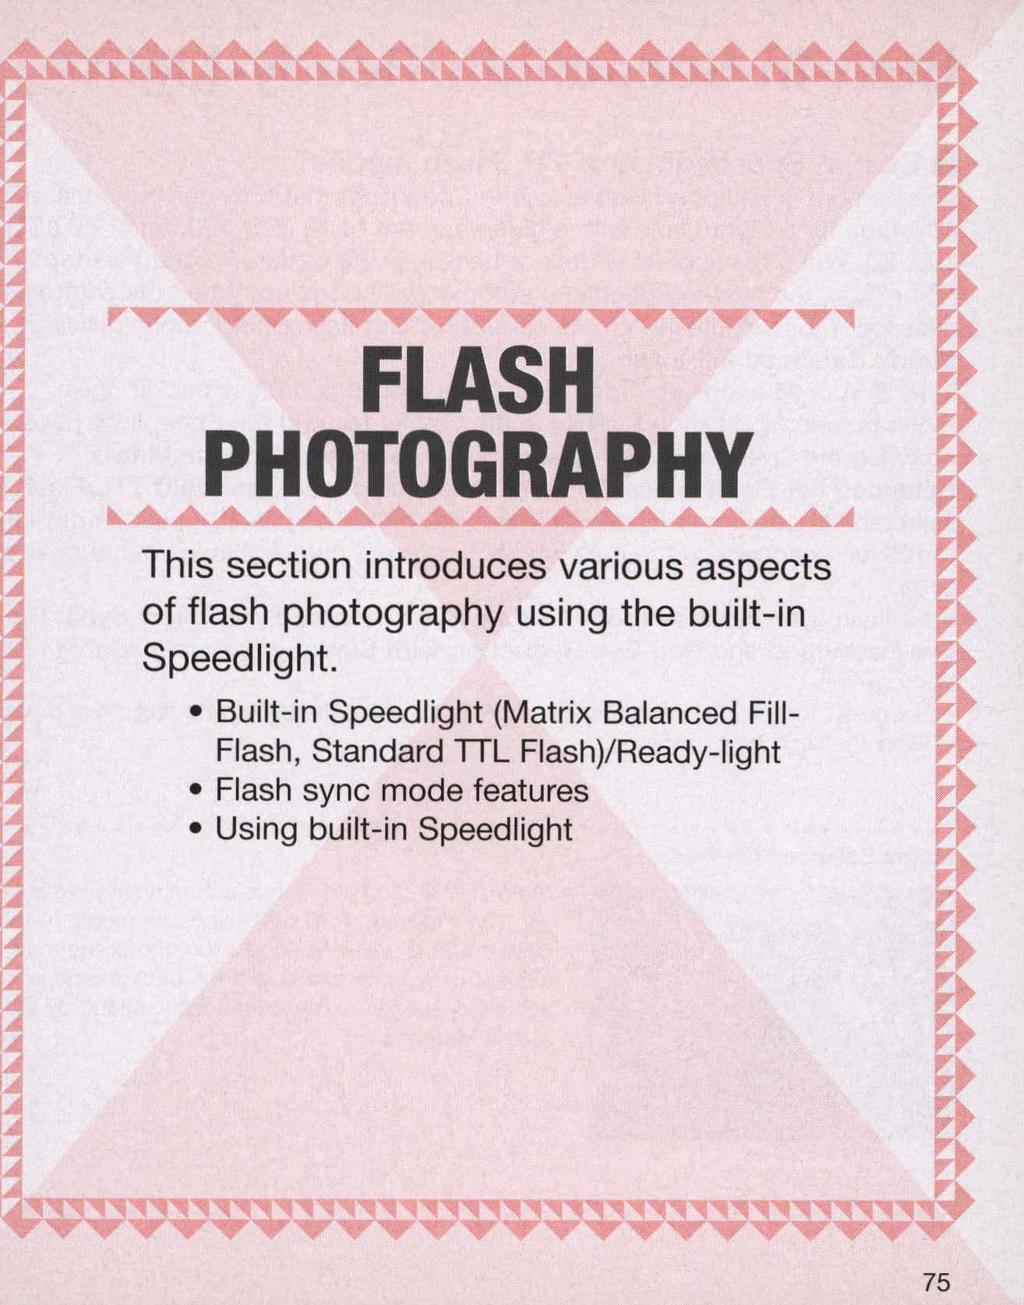 FLASH PHOTOGRAPHY This section introduces various aspects of flash photography using the built-in Speedlight.